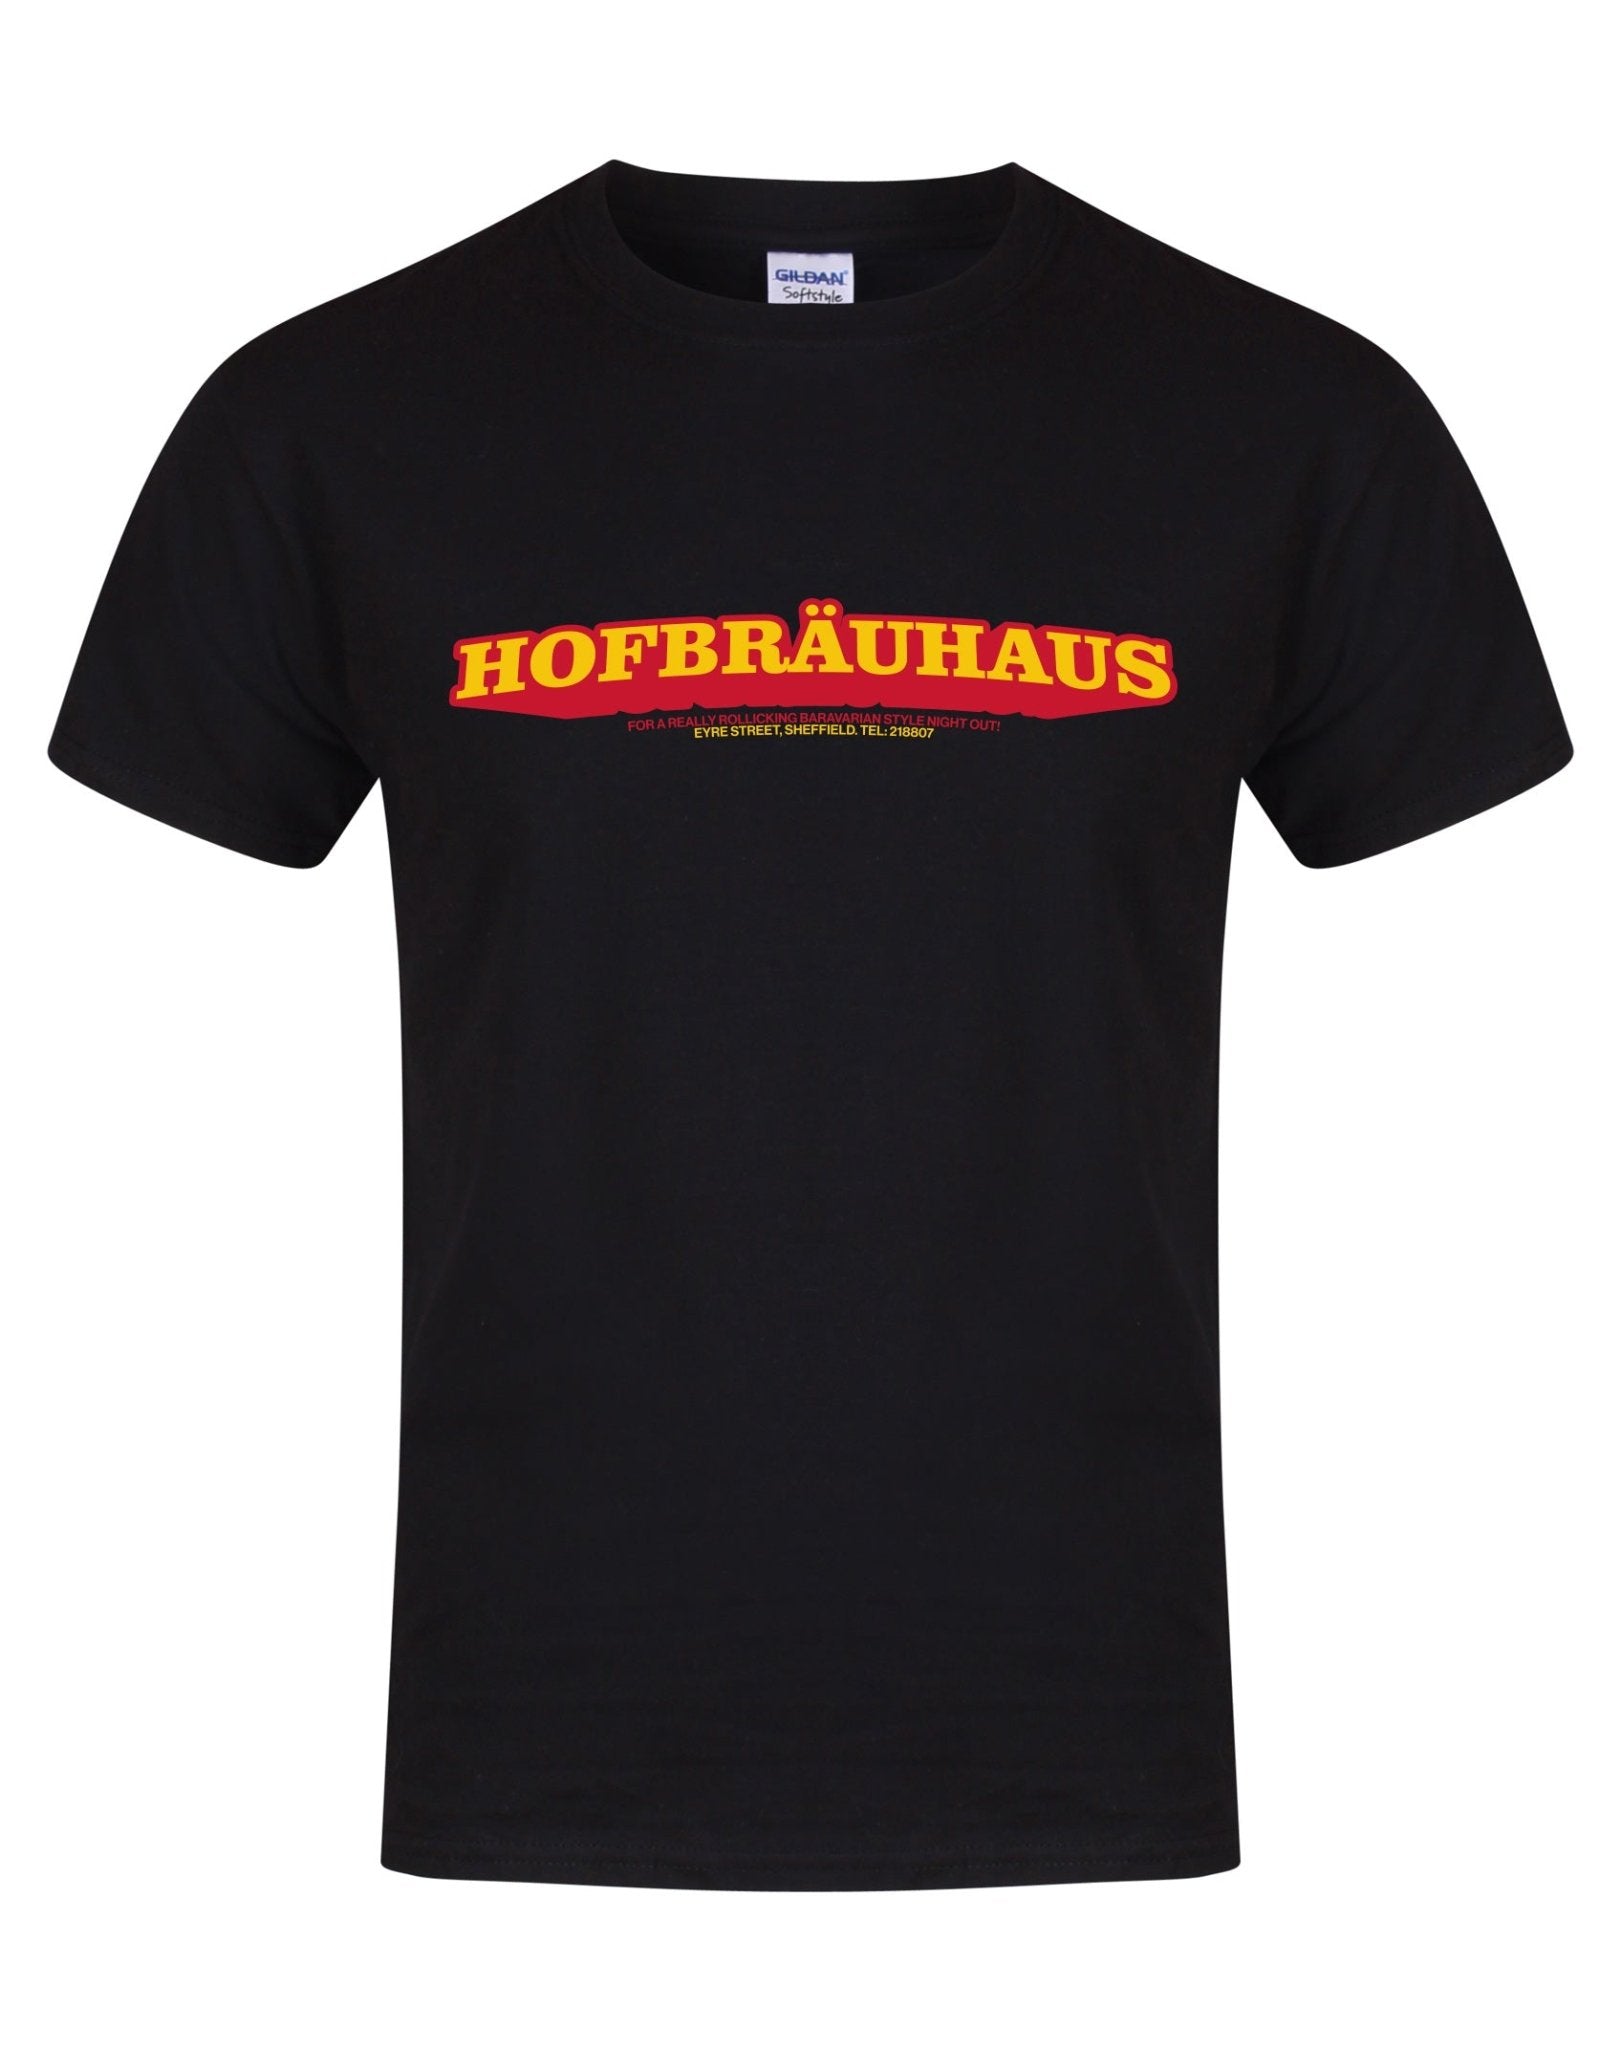 Hofbräuhaus unisex fit T-shirt - various colours - Dirty Stop Outs